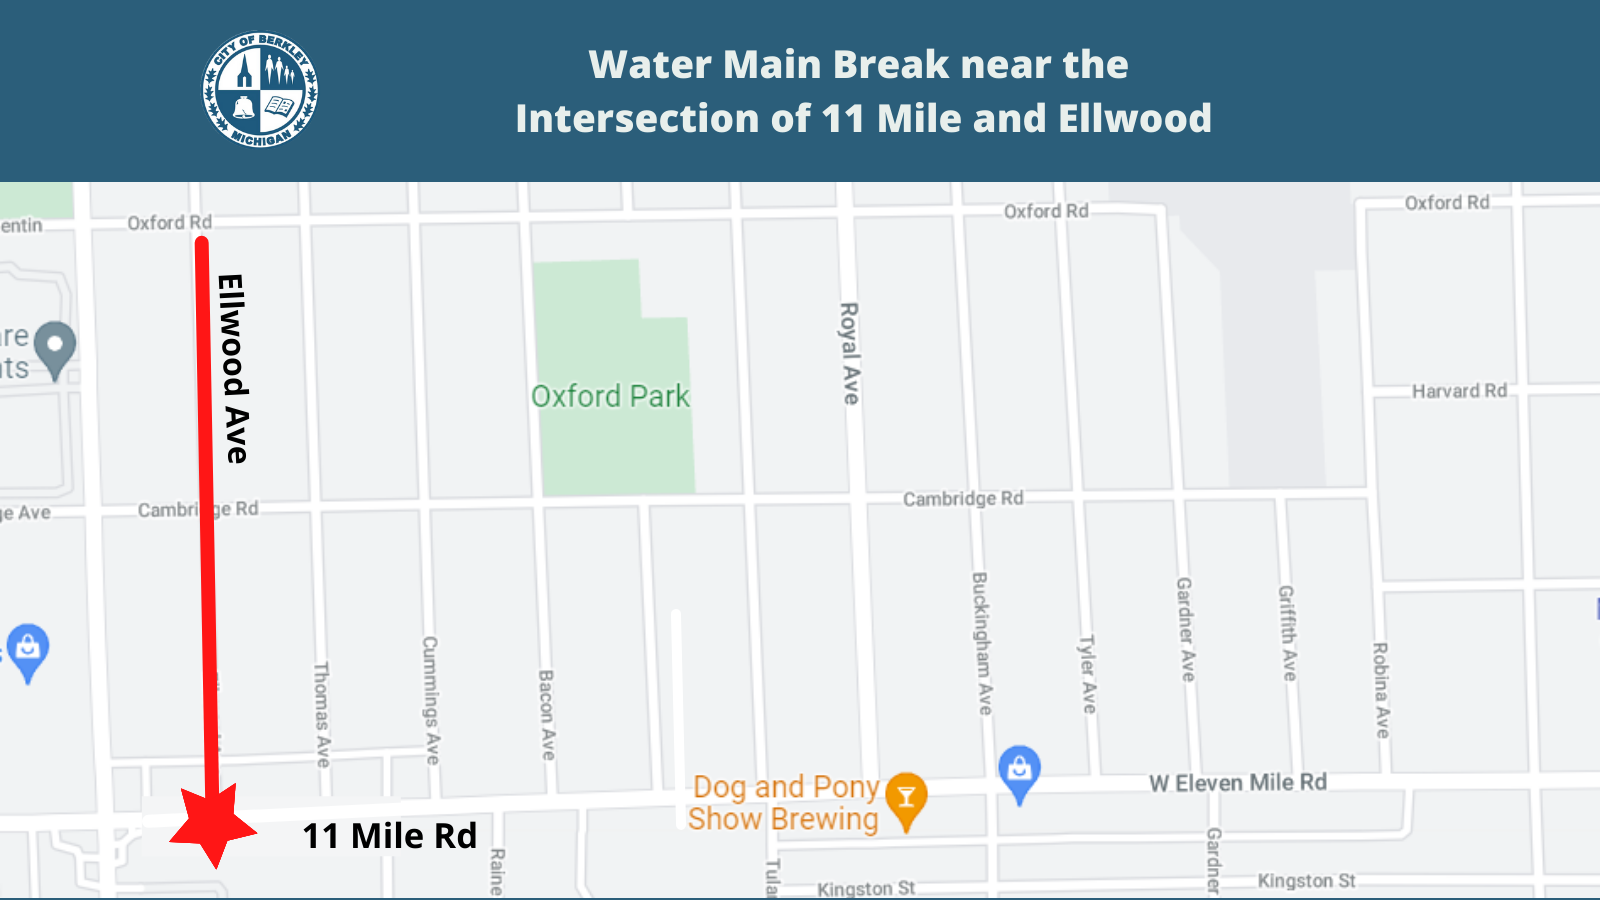 Water Main Break Maps_Intersection of 11 Mile and Ellwood